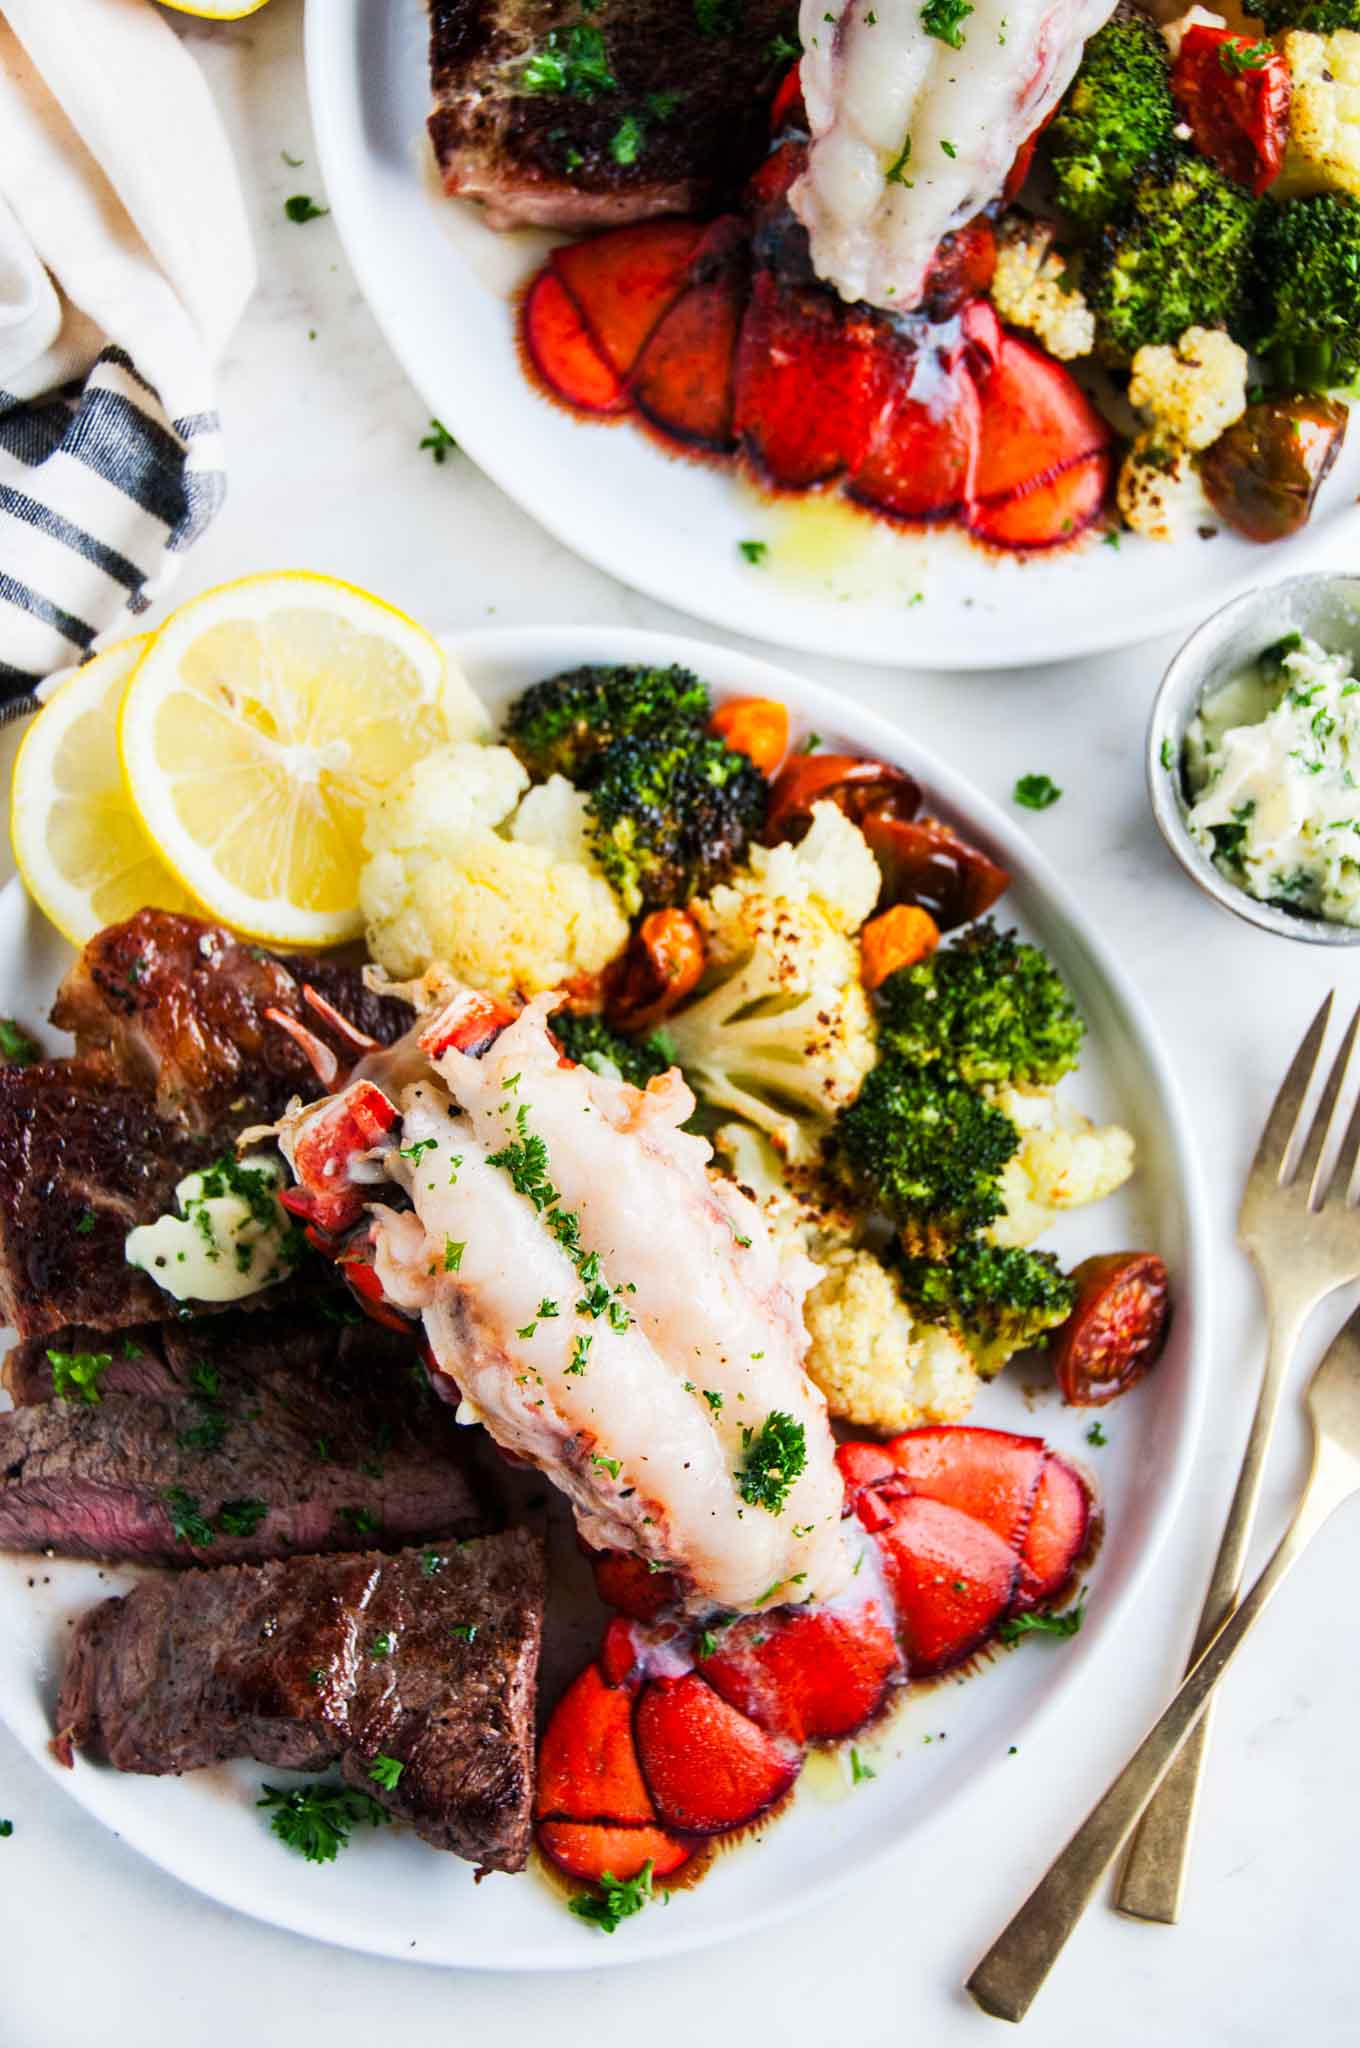 Surf and Turf Steak and Lobster Tail For Two - Aberdeen's Kitchen